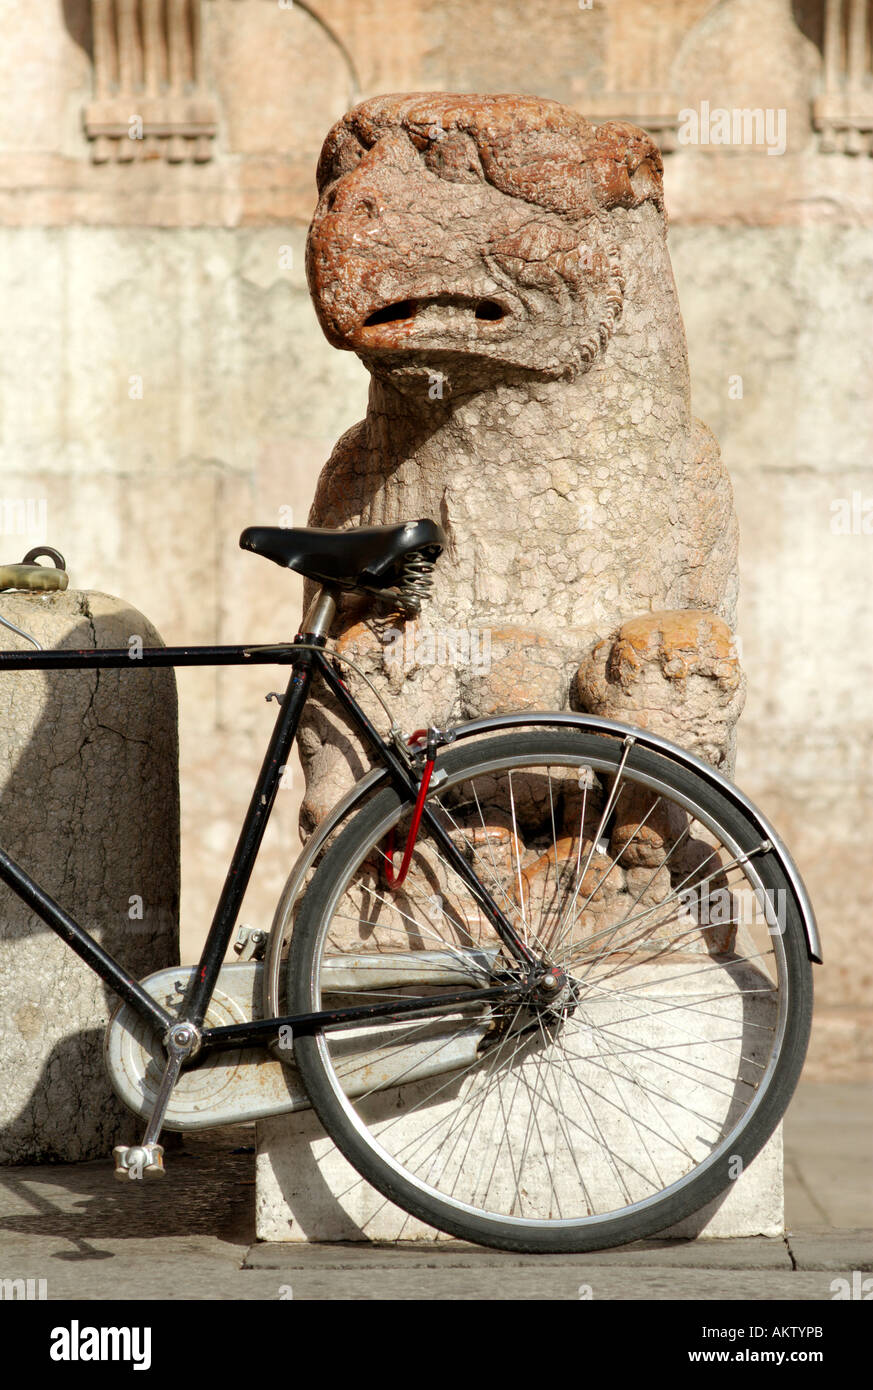 Ferrara Italy A bicycle leaning against a centuries old marble sculpture of the Duomo Stock Photo